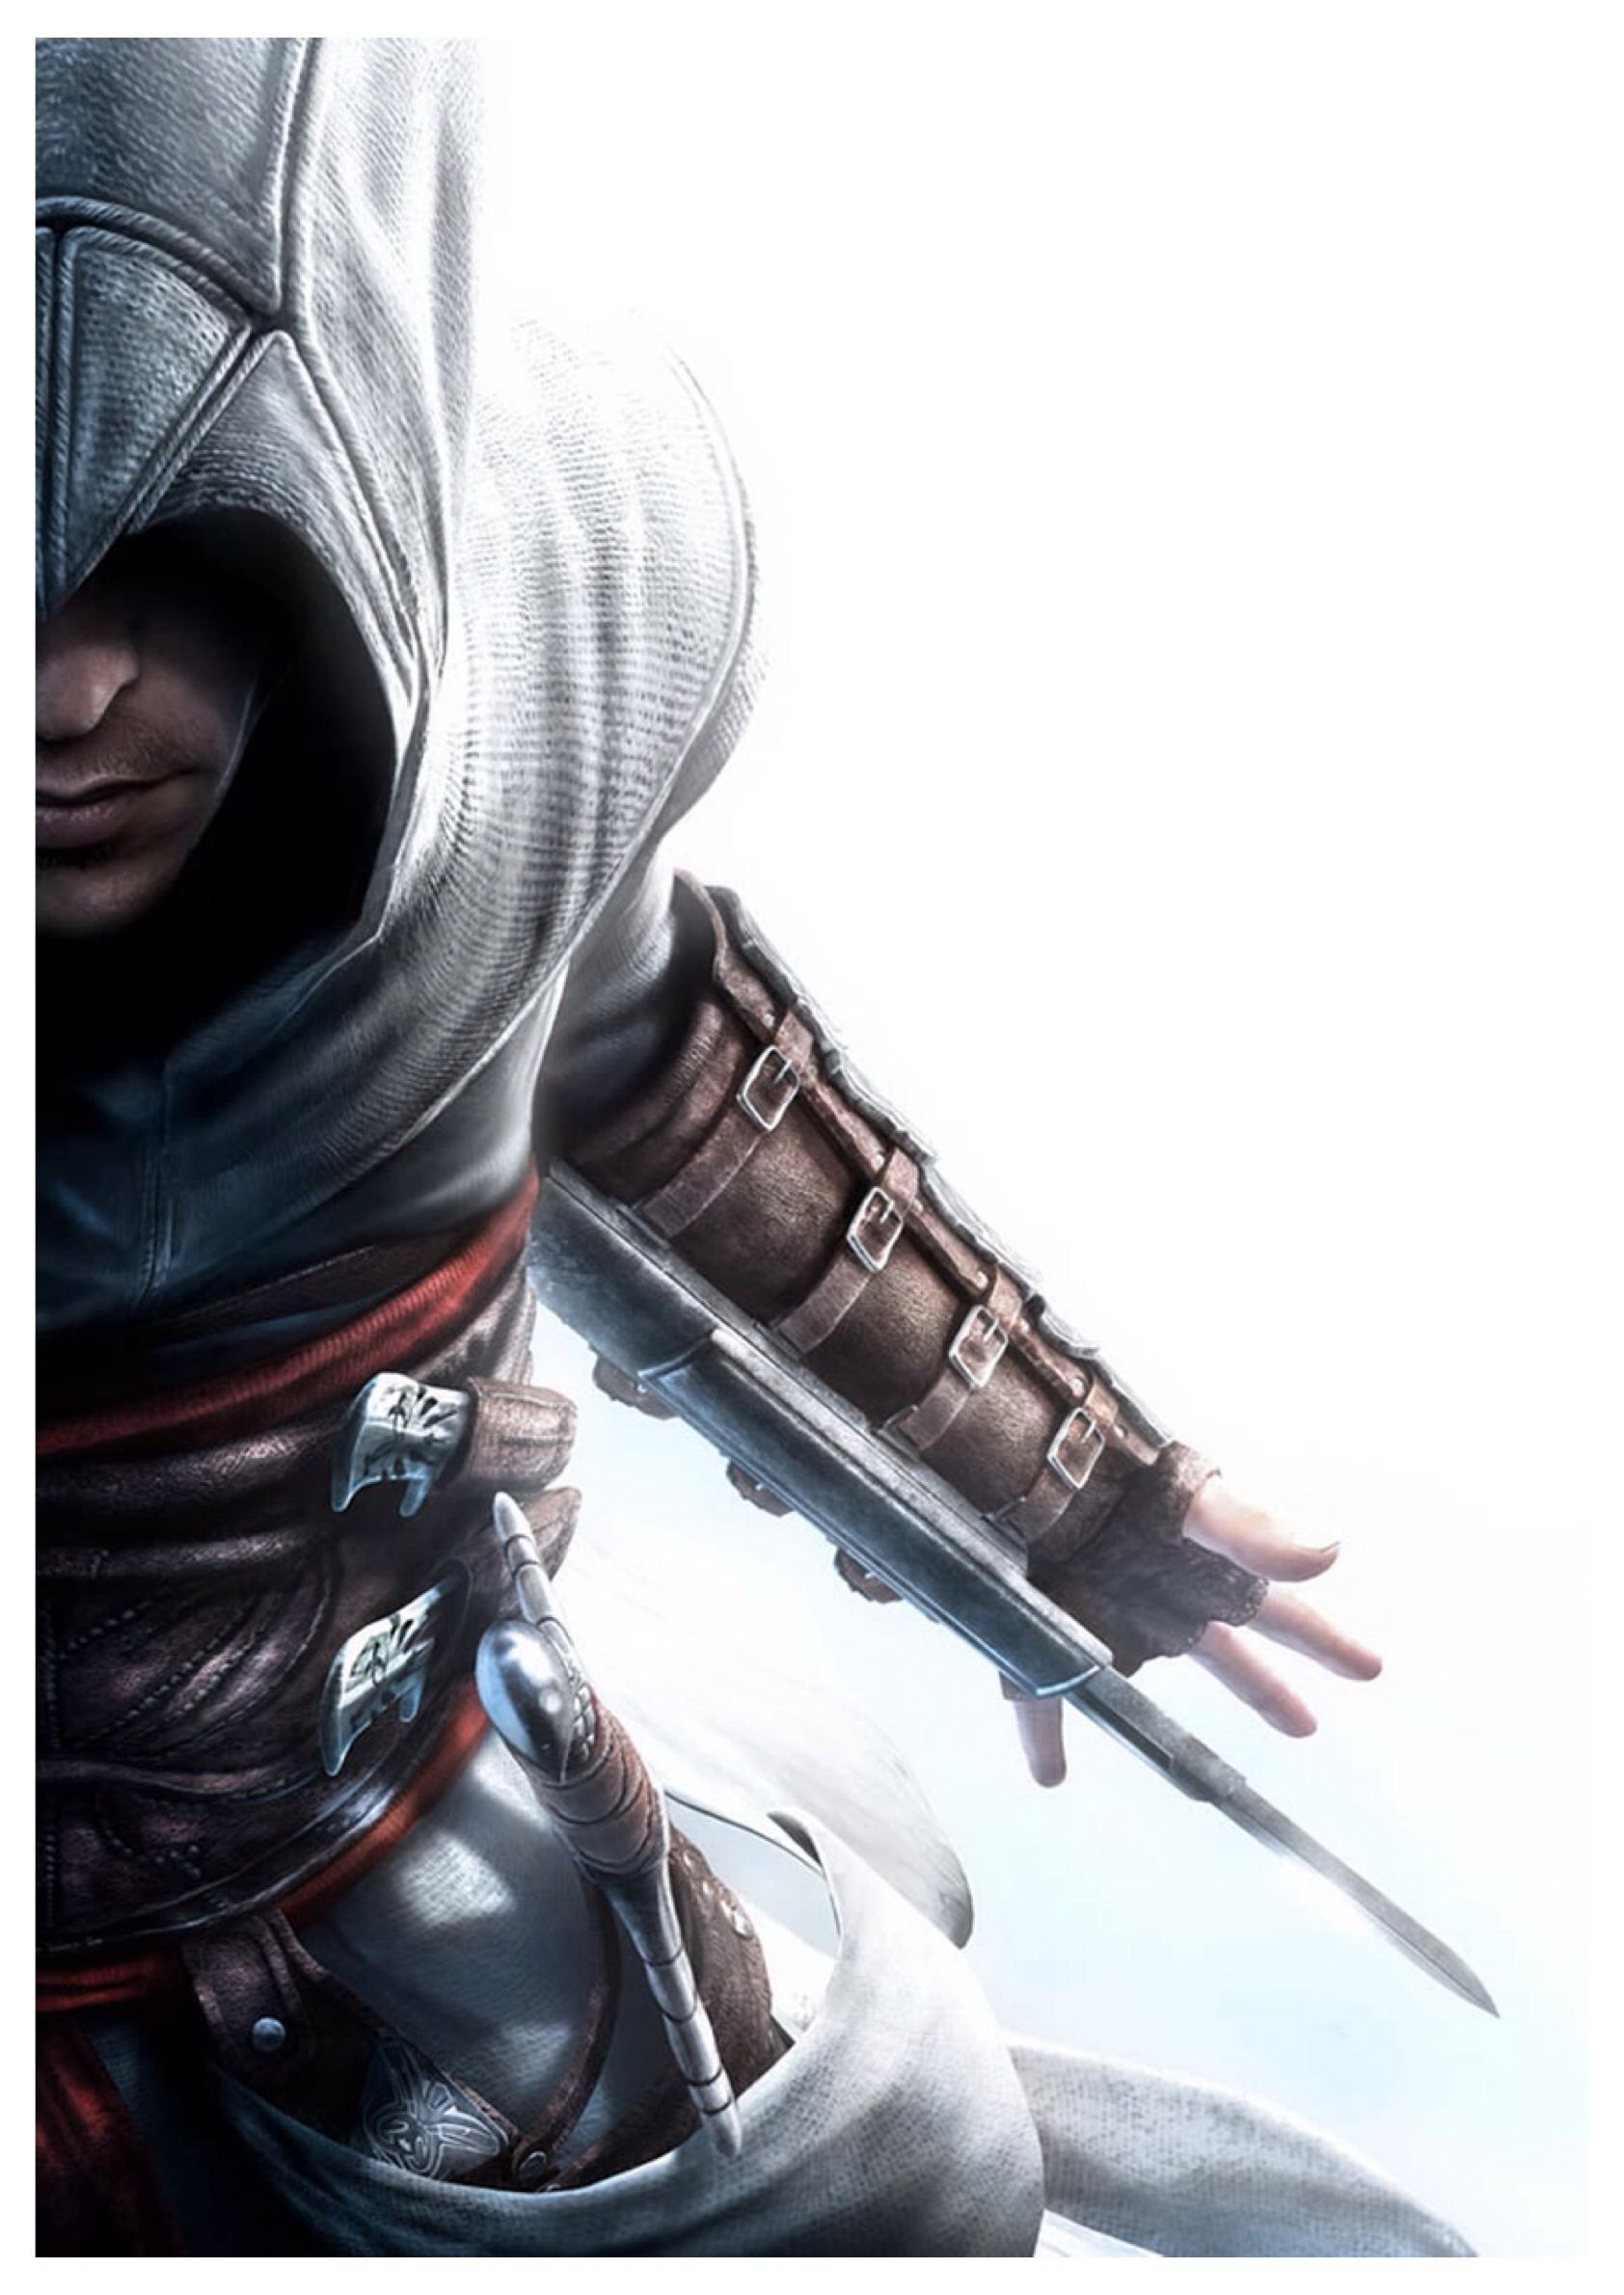 Altier pose. Assassins creed, Assassins creed game, Assassin's creed